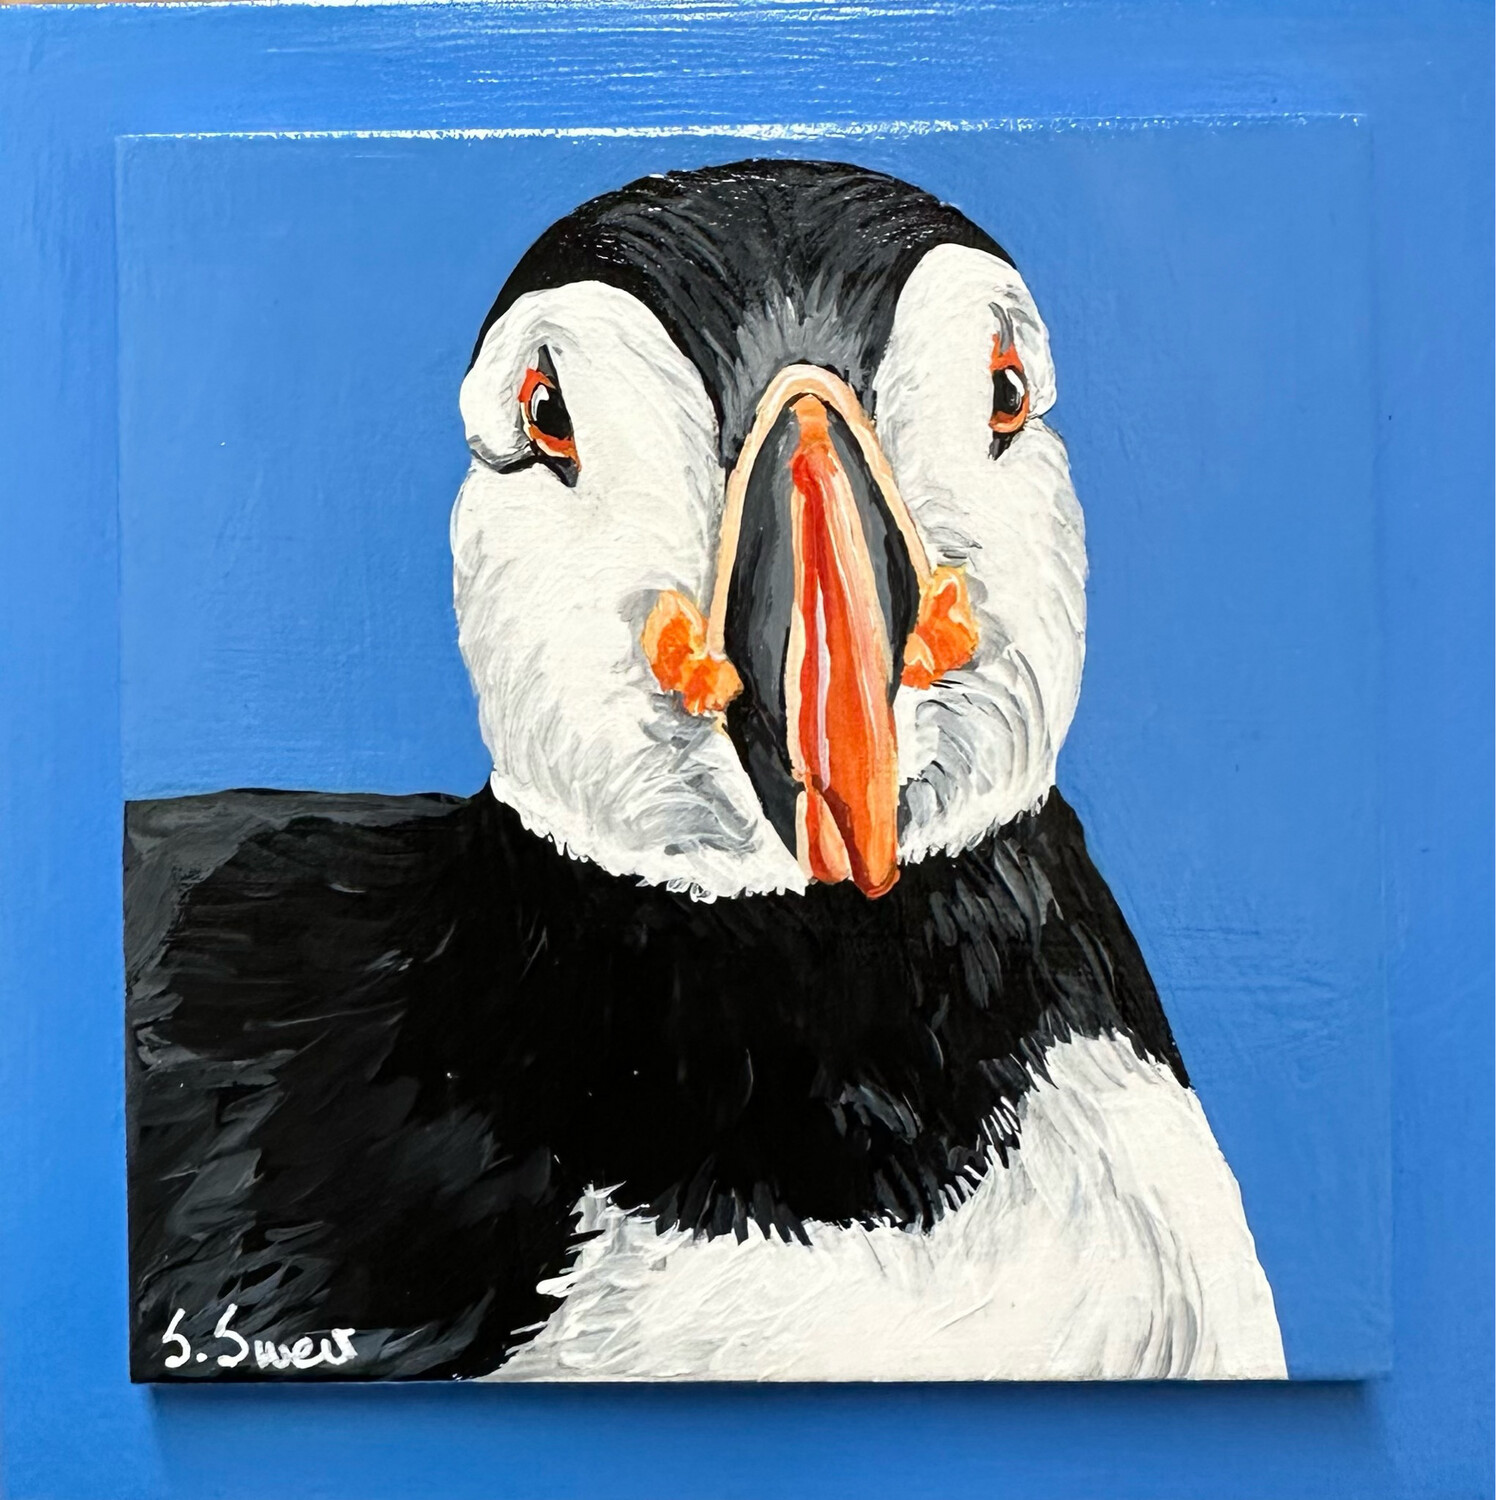 Victor the Puffin on Bright Blue